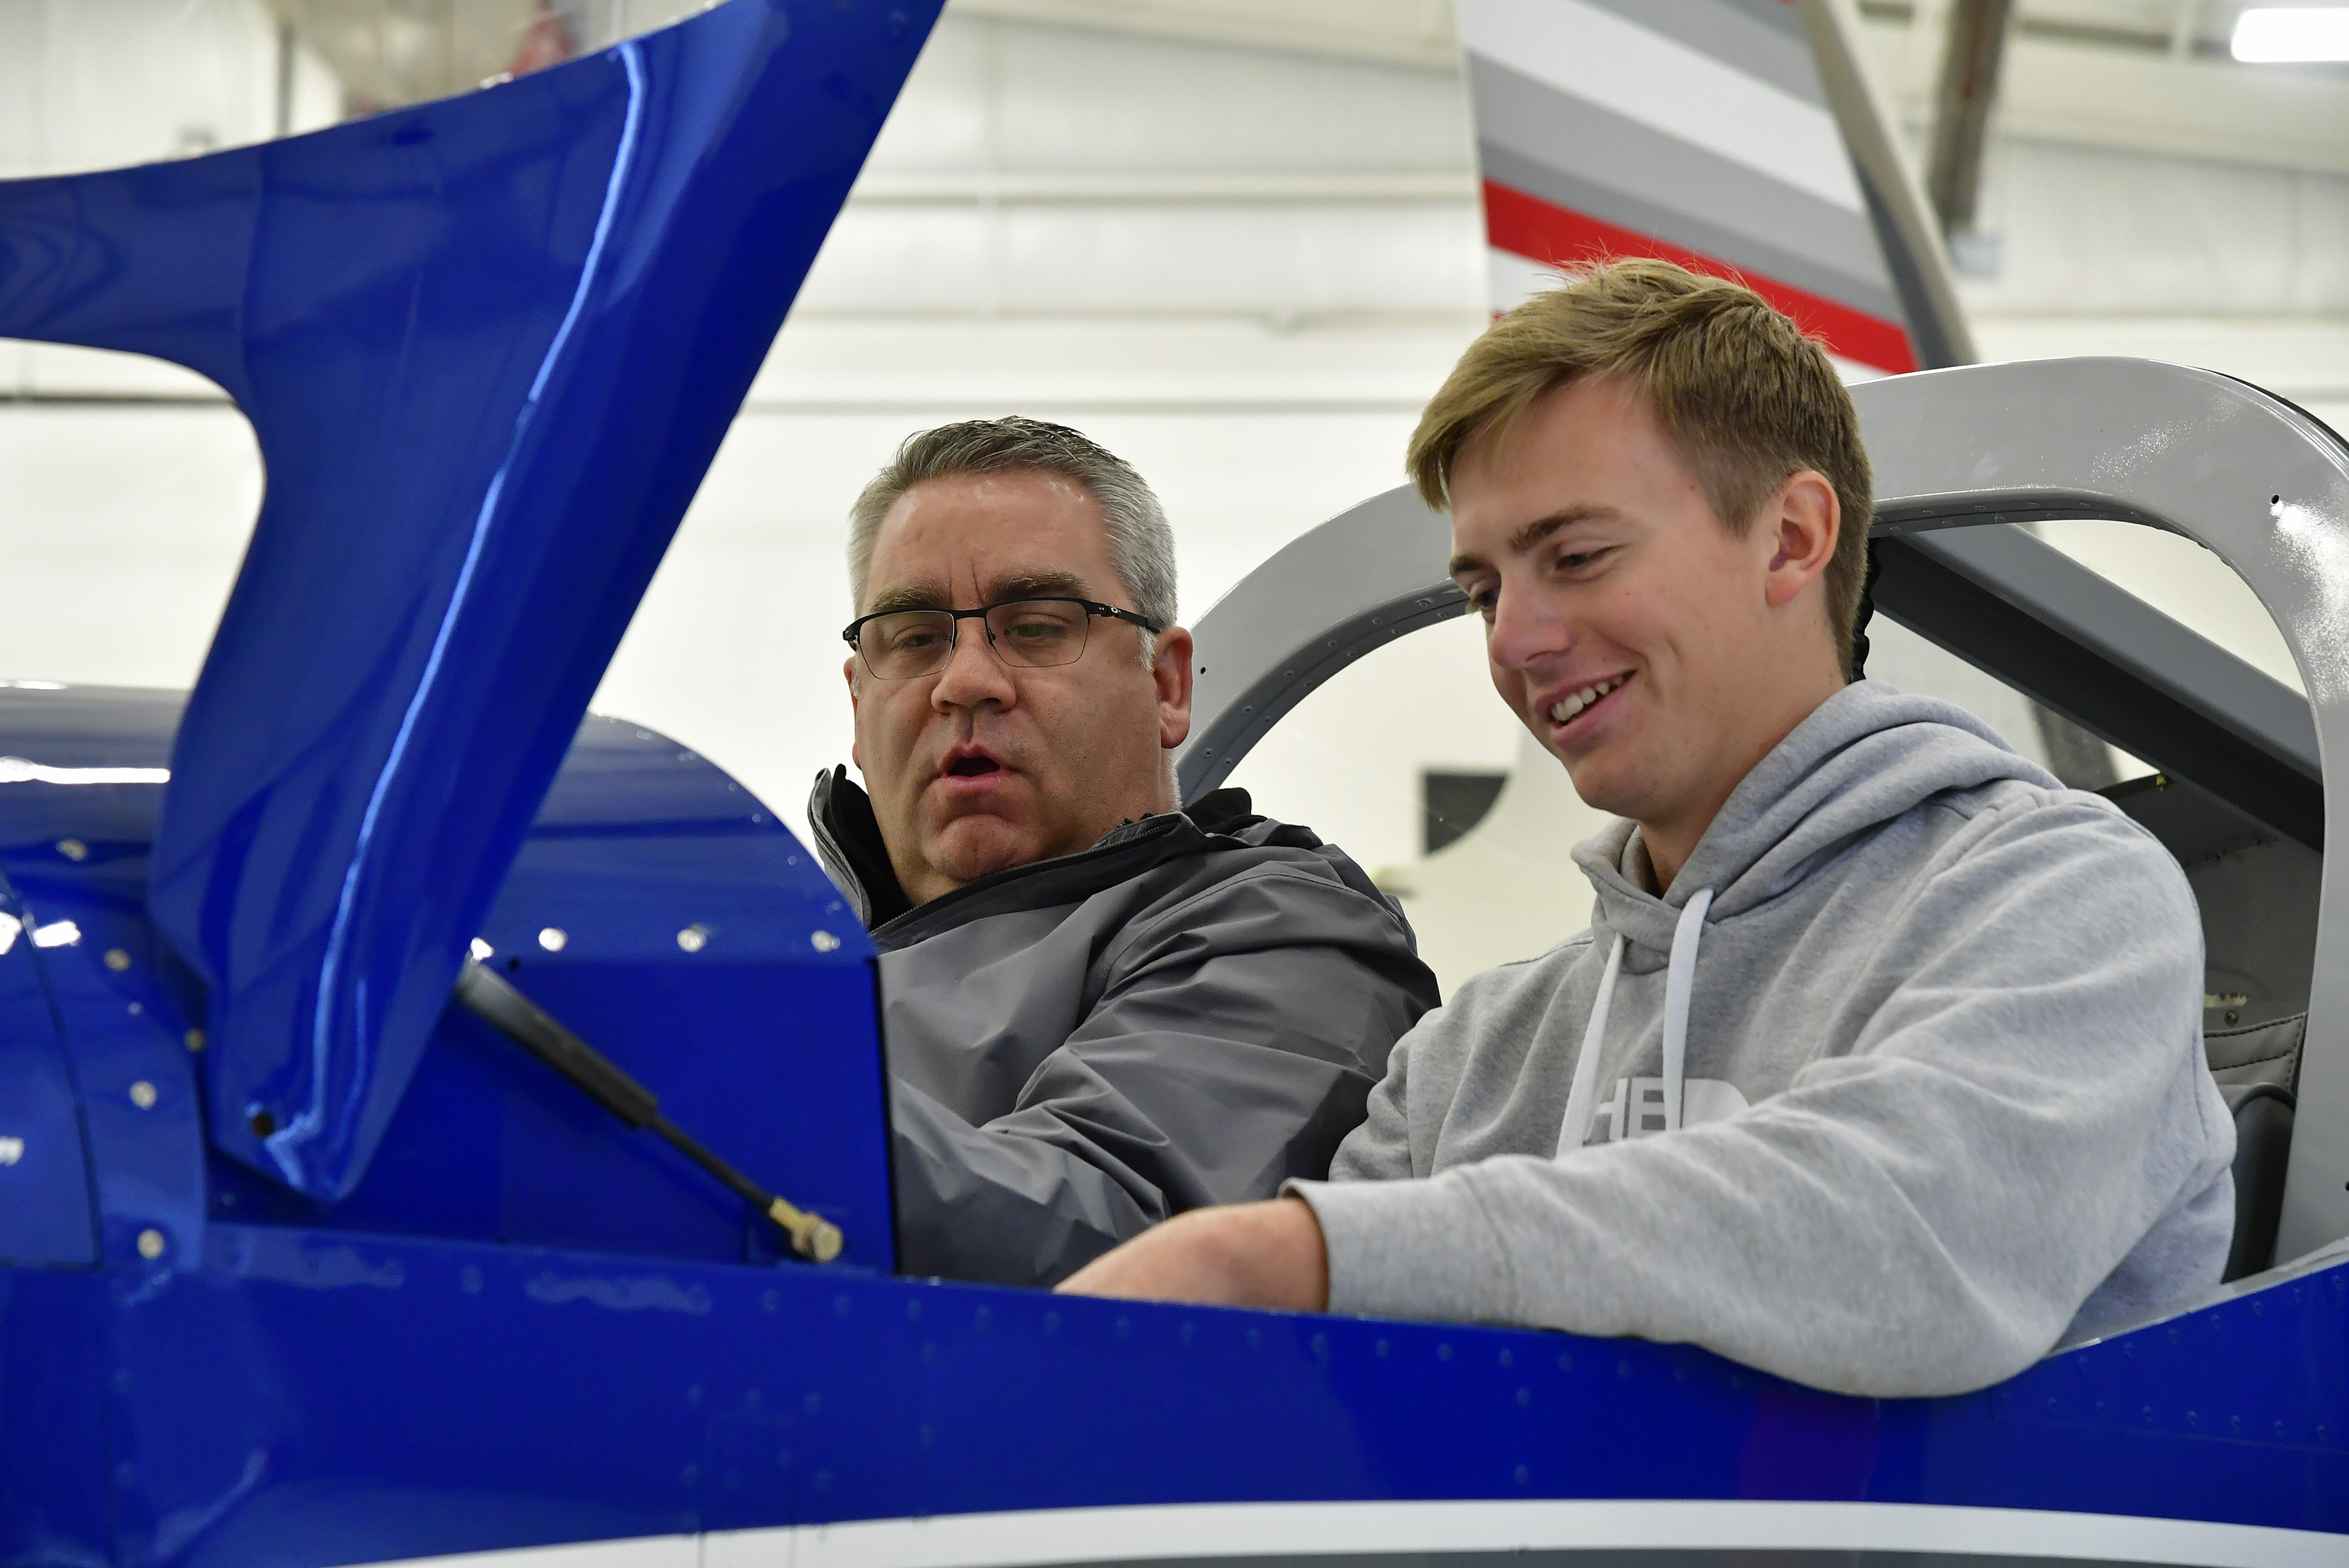 Phillip Campbell familiarizes a Van's Aircraft RV-12 cockpit with McKinney High School student Bryan Soltys-Niemann during an aviation class at McKinney National Airport in McKinney, Texas. Photo by David Tulis.